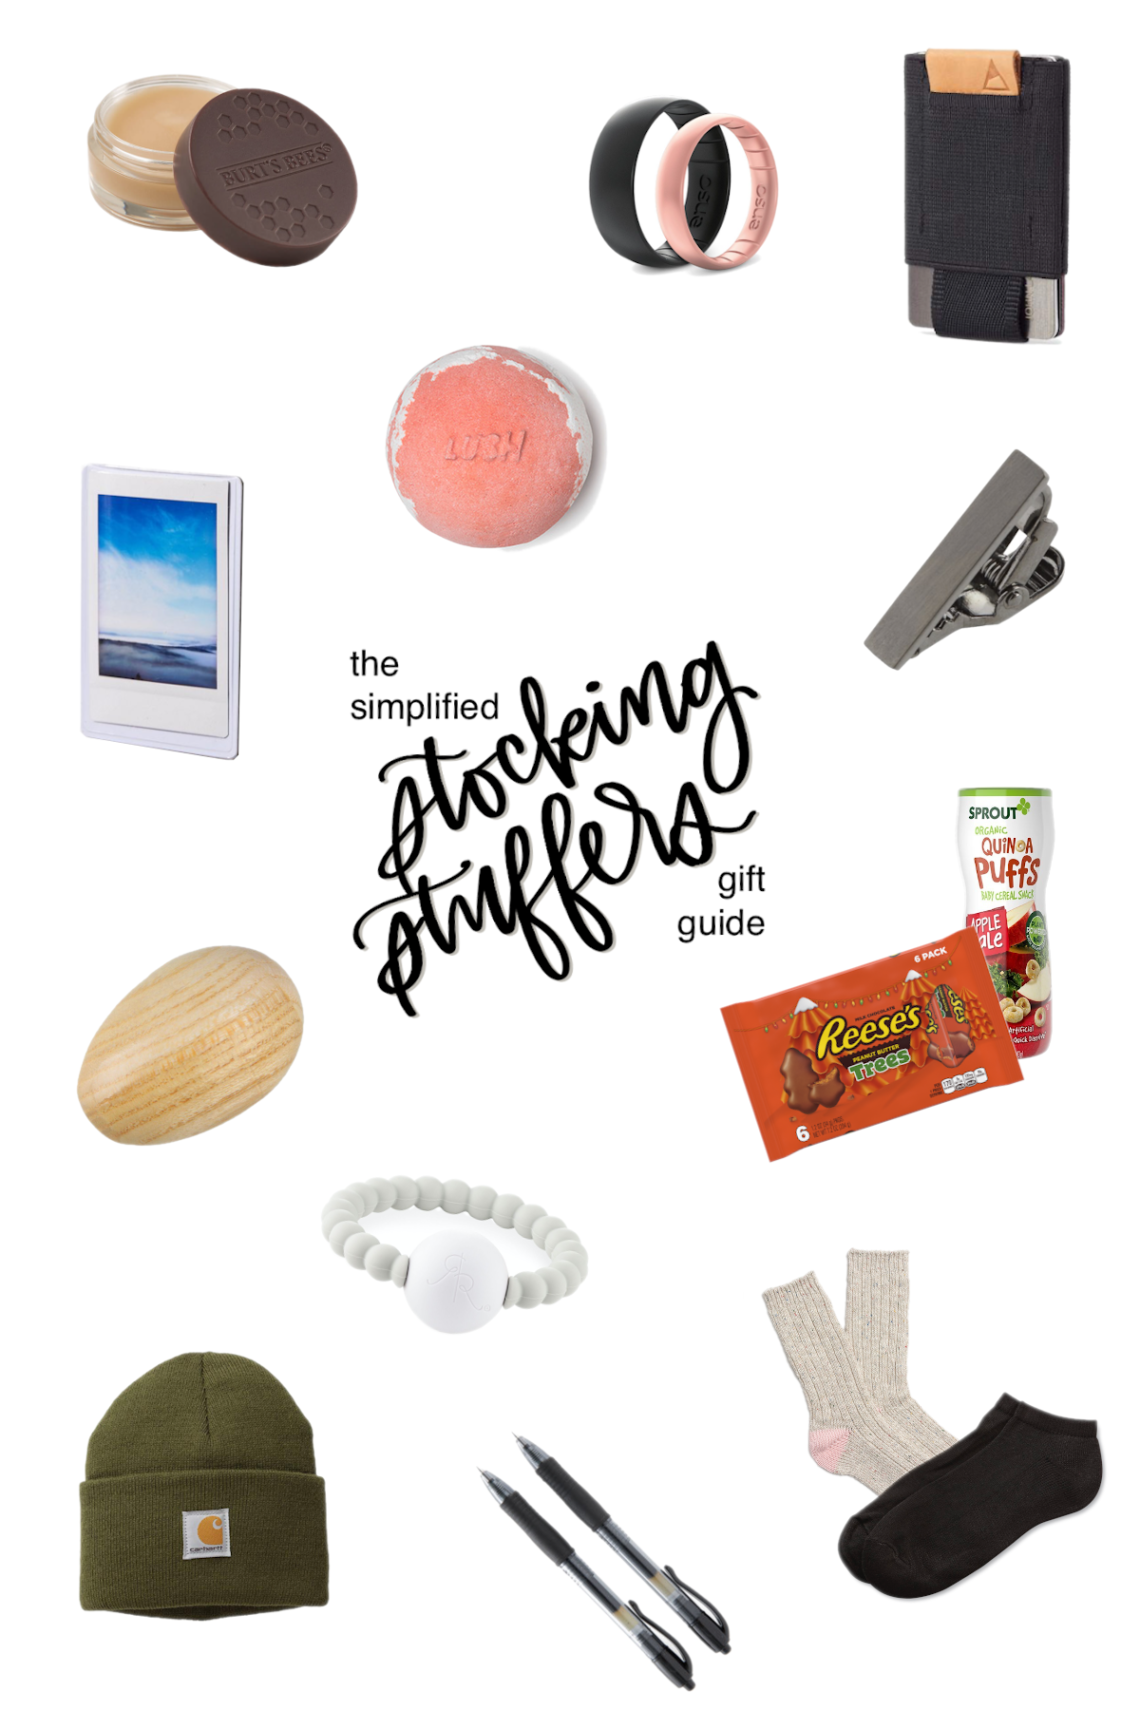 The Simplified Stocking Stuffer Gift Guide: 12 Under $20 Stocking Stuffer Christmas Gift Ideas